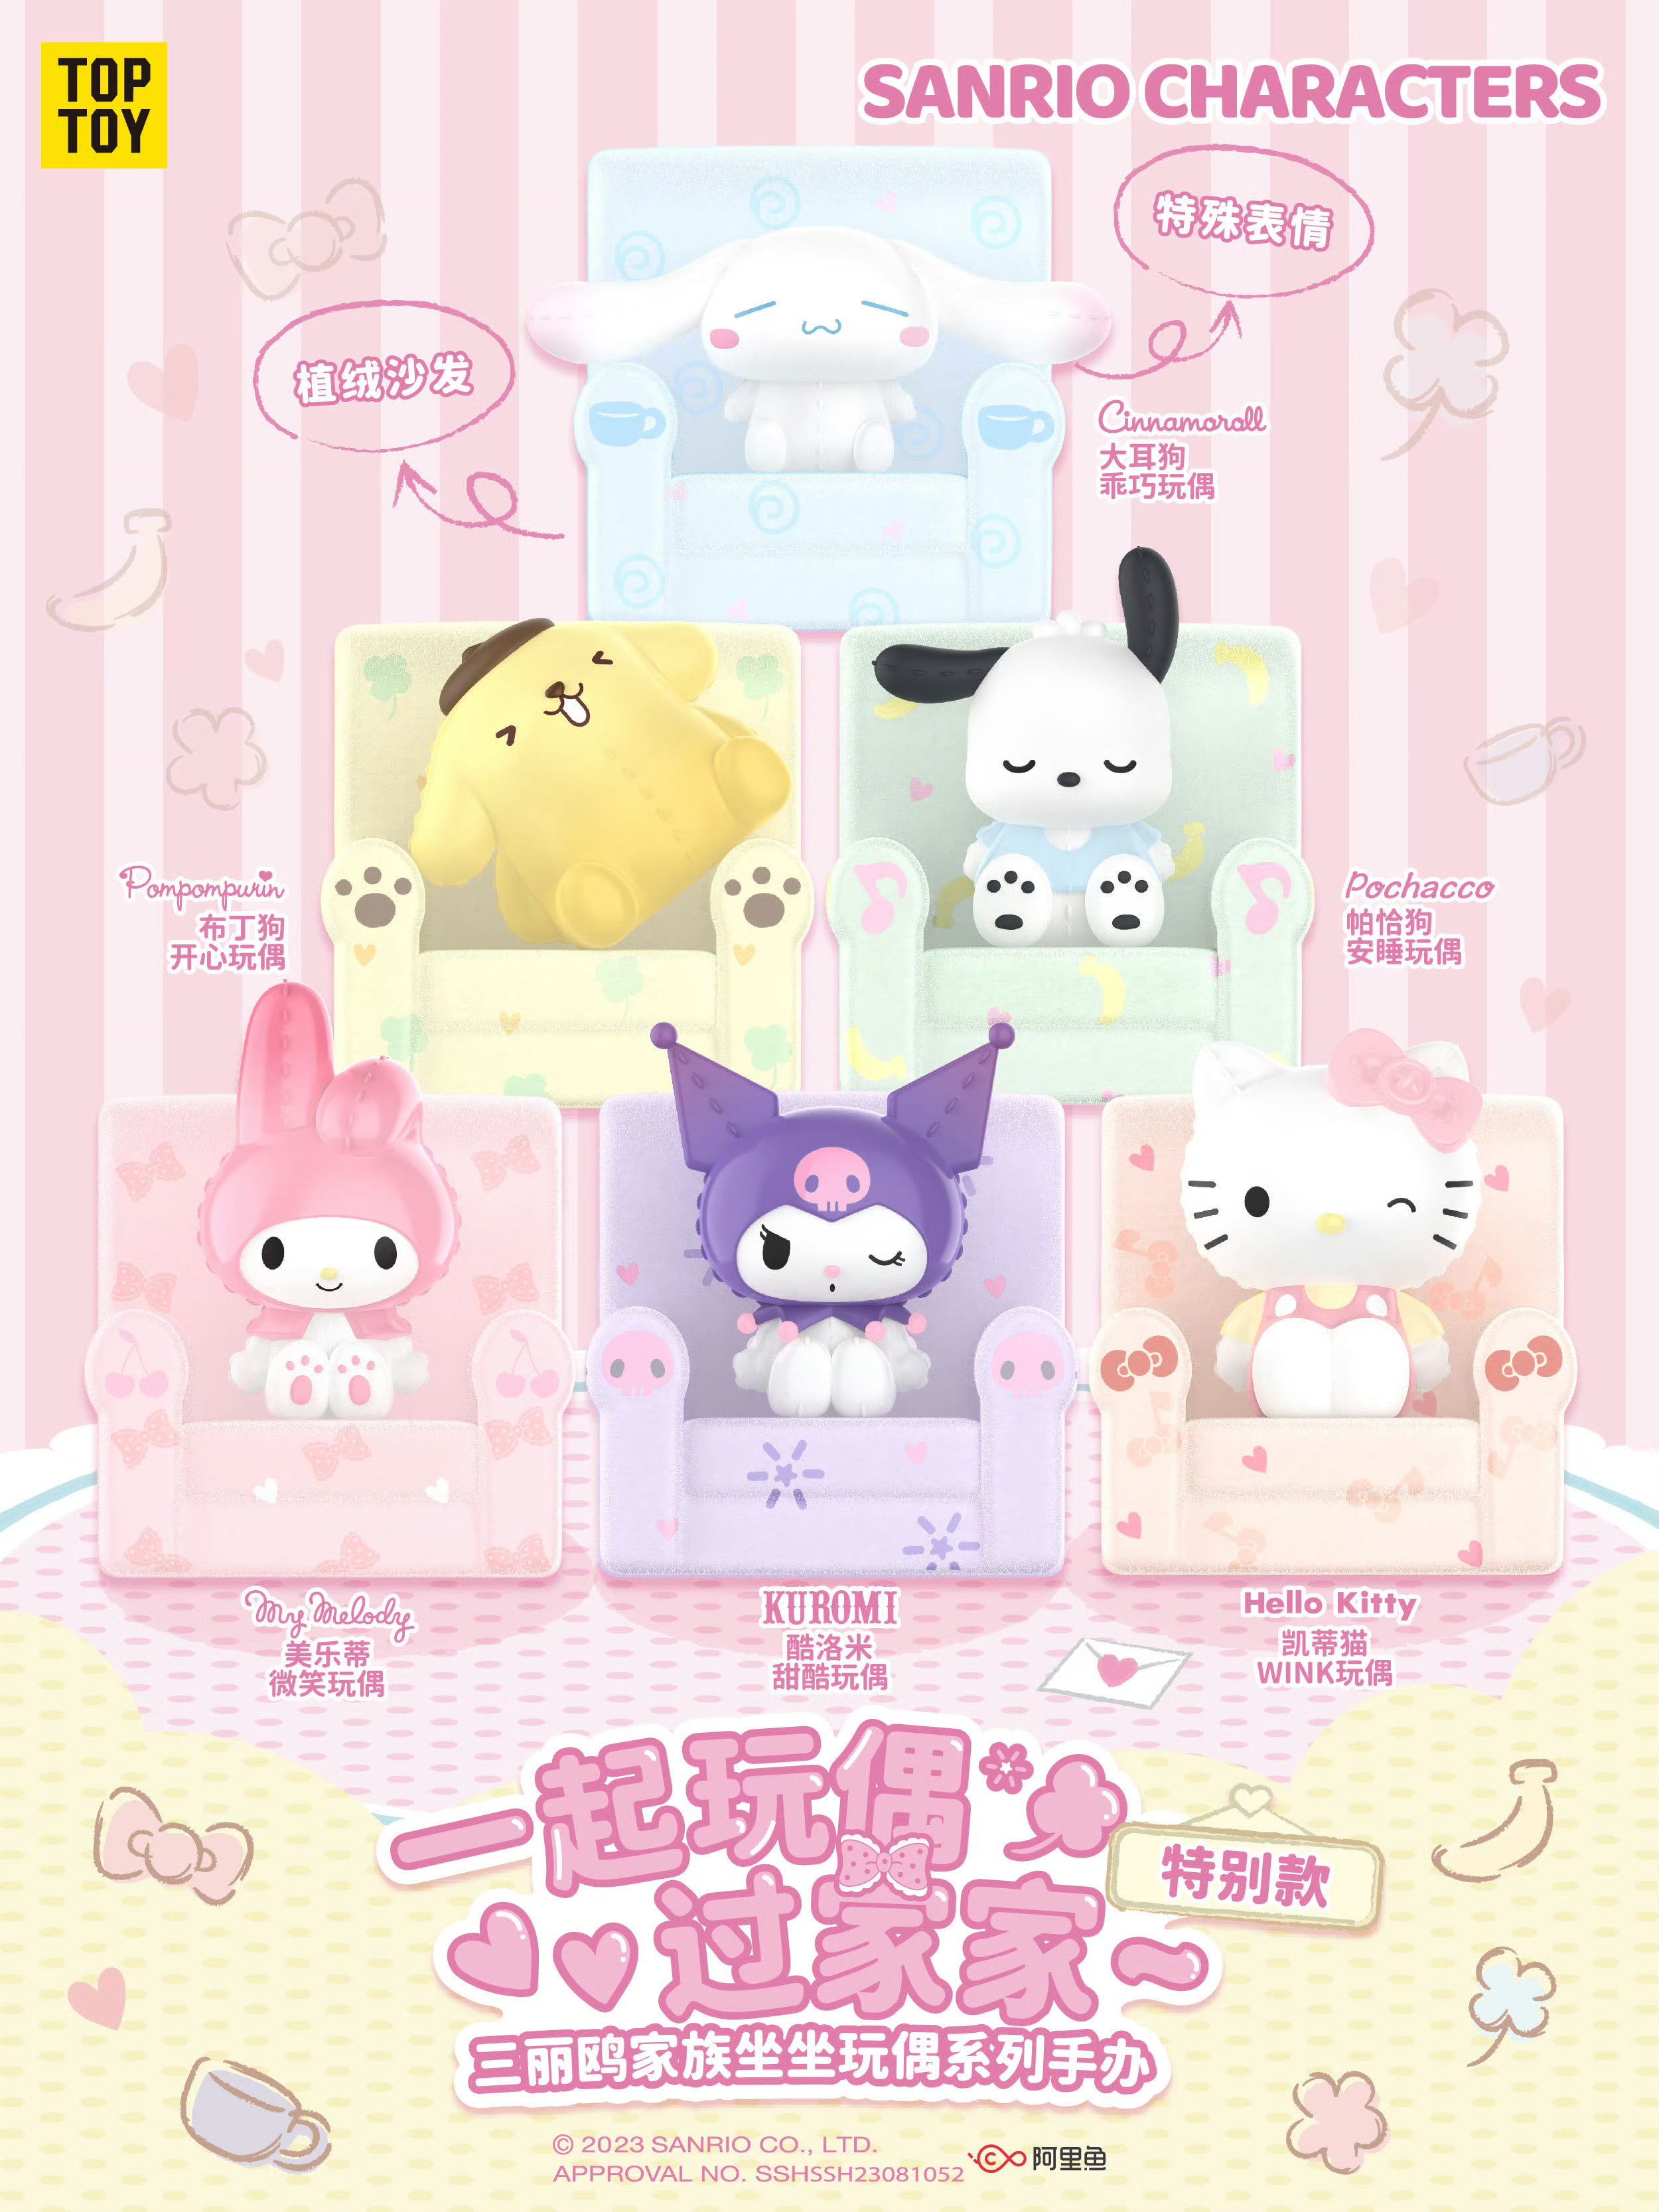 [TOP TOY] SANRIO - Sanrio Characters Sitting Dolls Blind Box